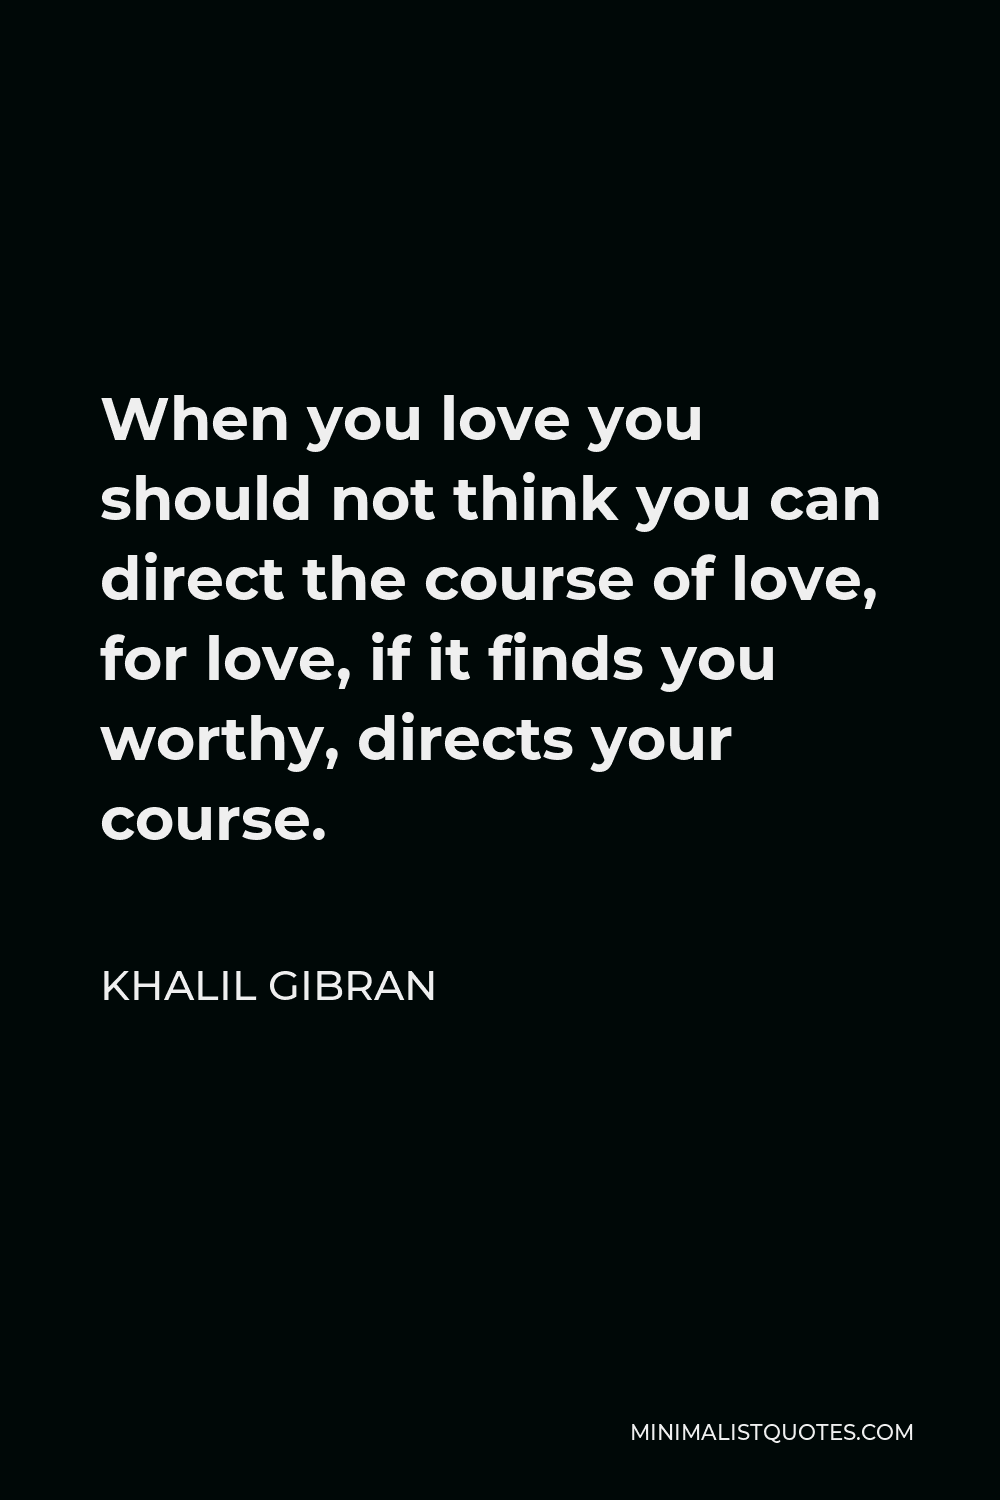 Khalil Gibran Quote - When you love you should not think you can direct the course of love, for love, if it finds you worthy, directs your course.